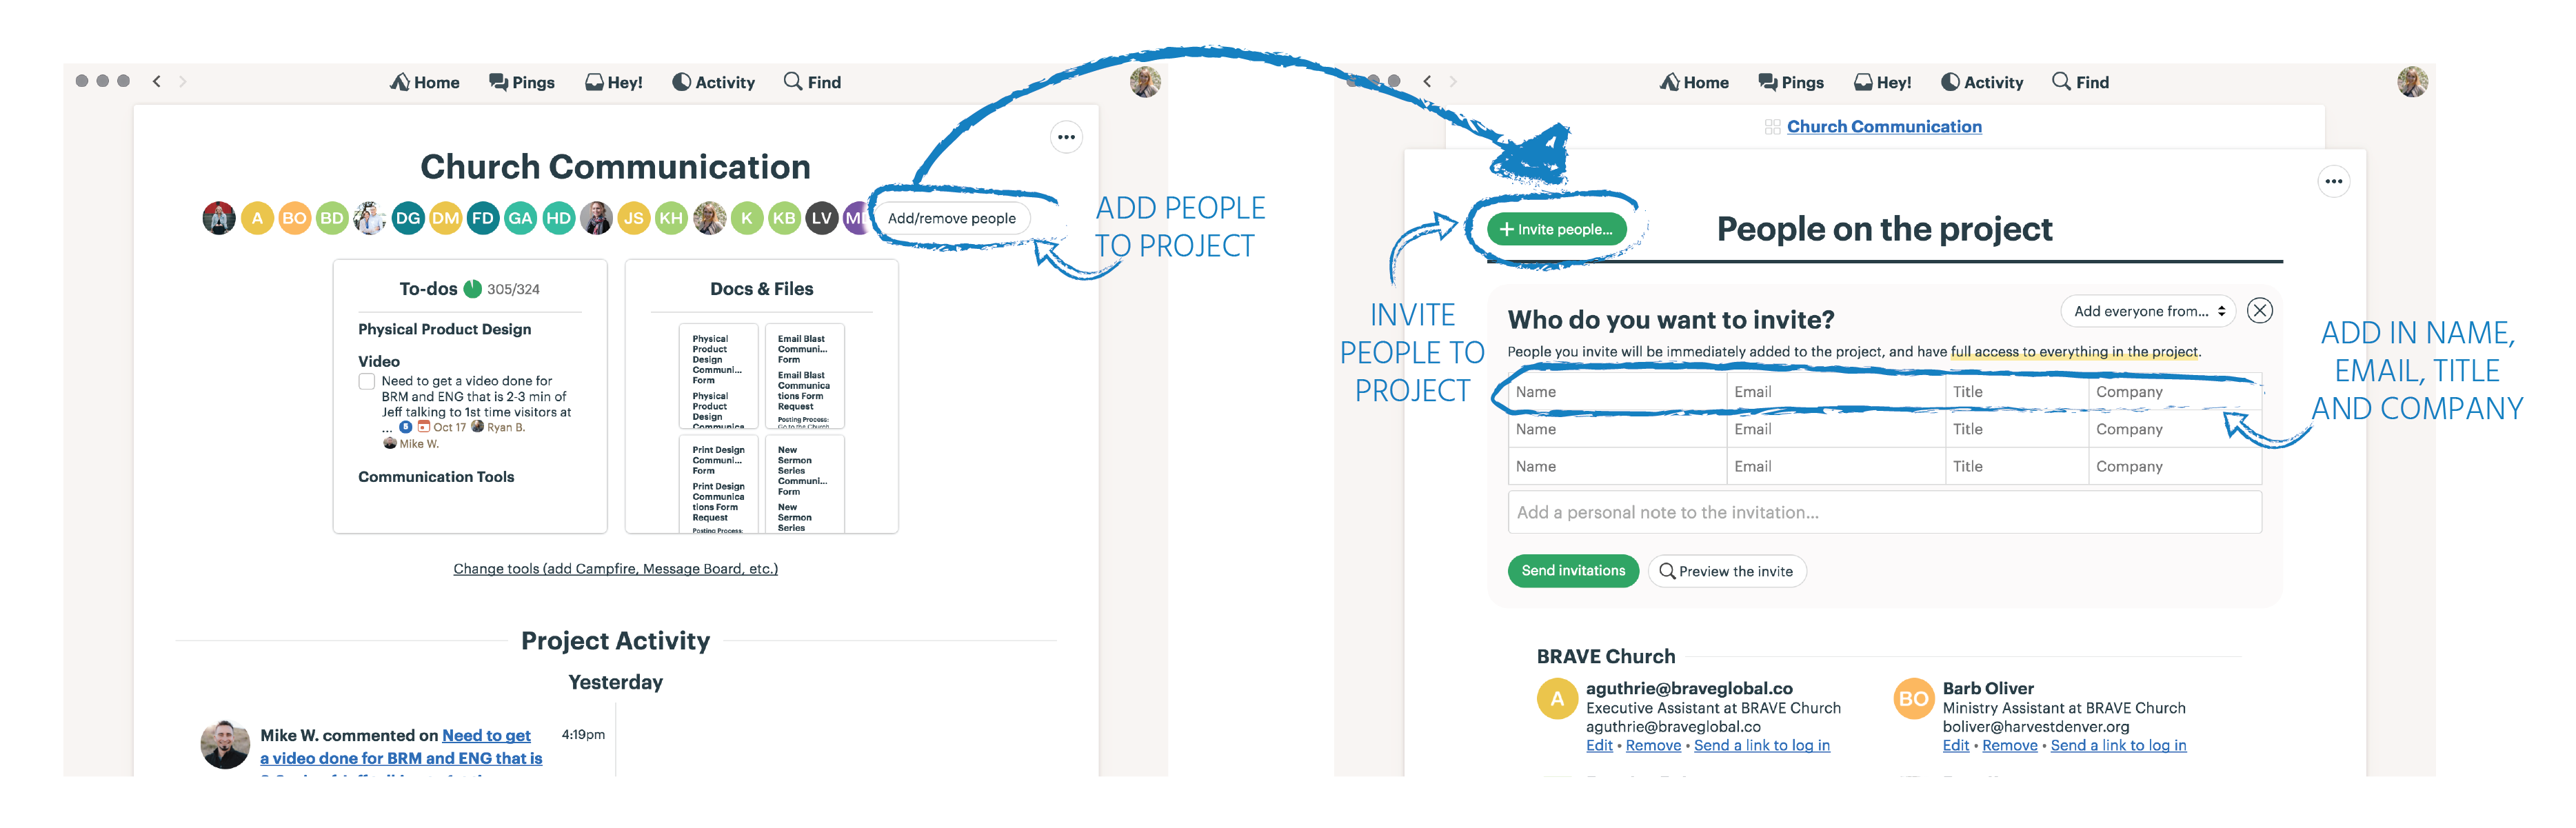 Basecamp app add people to project